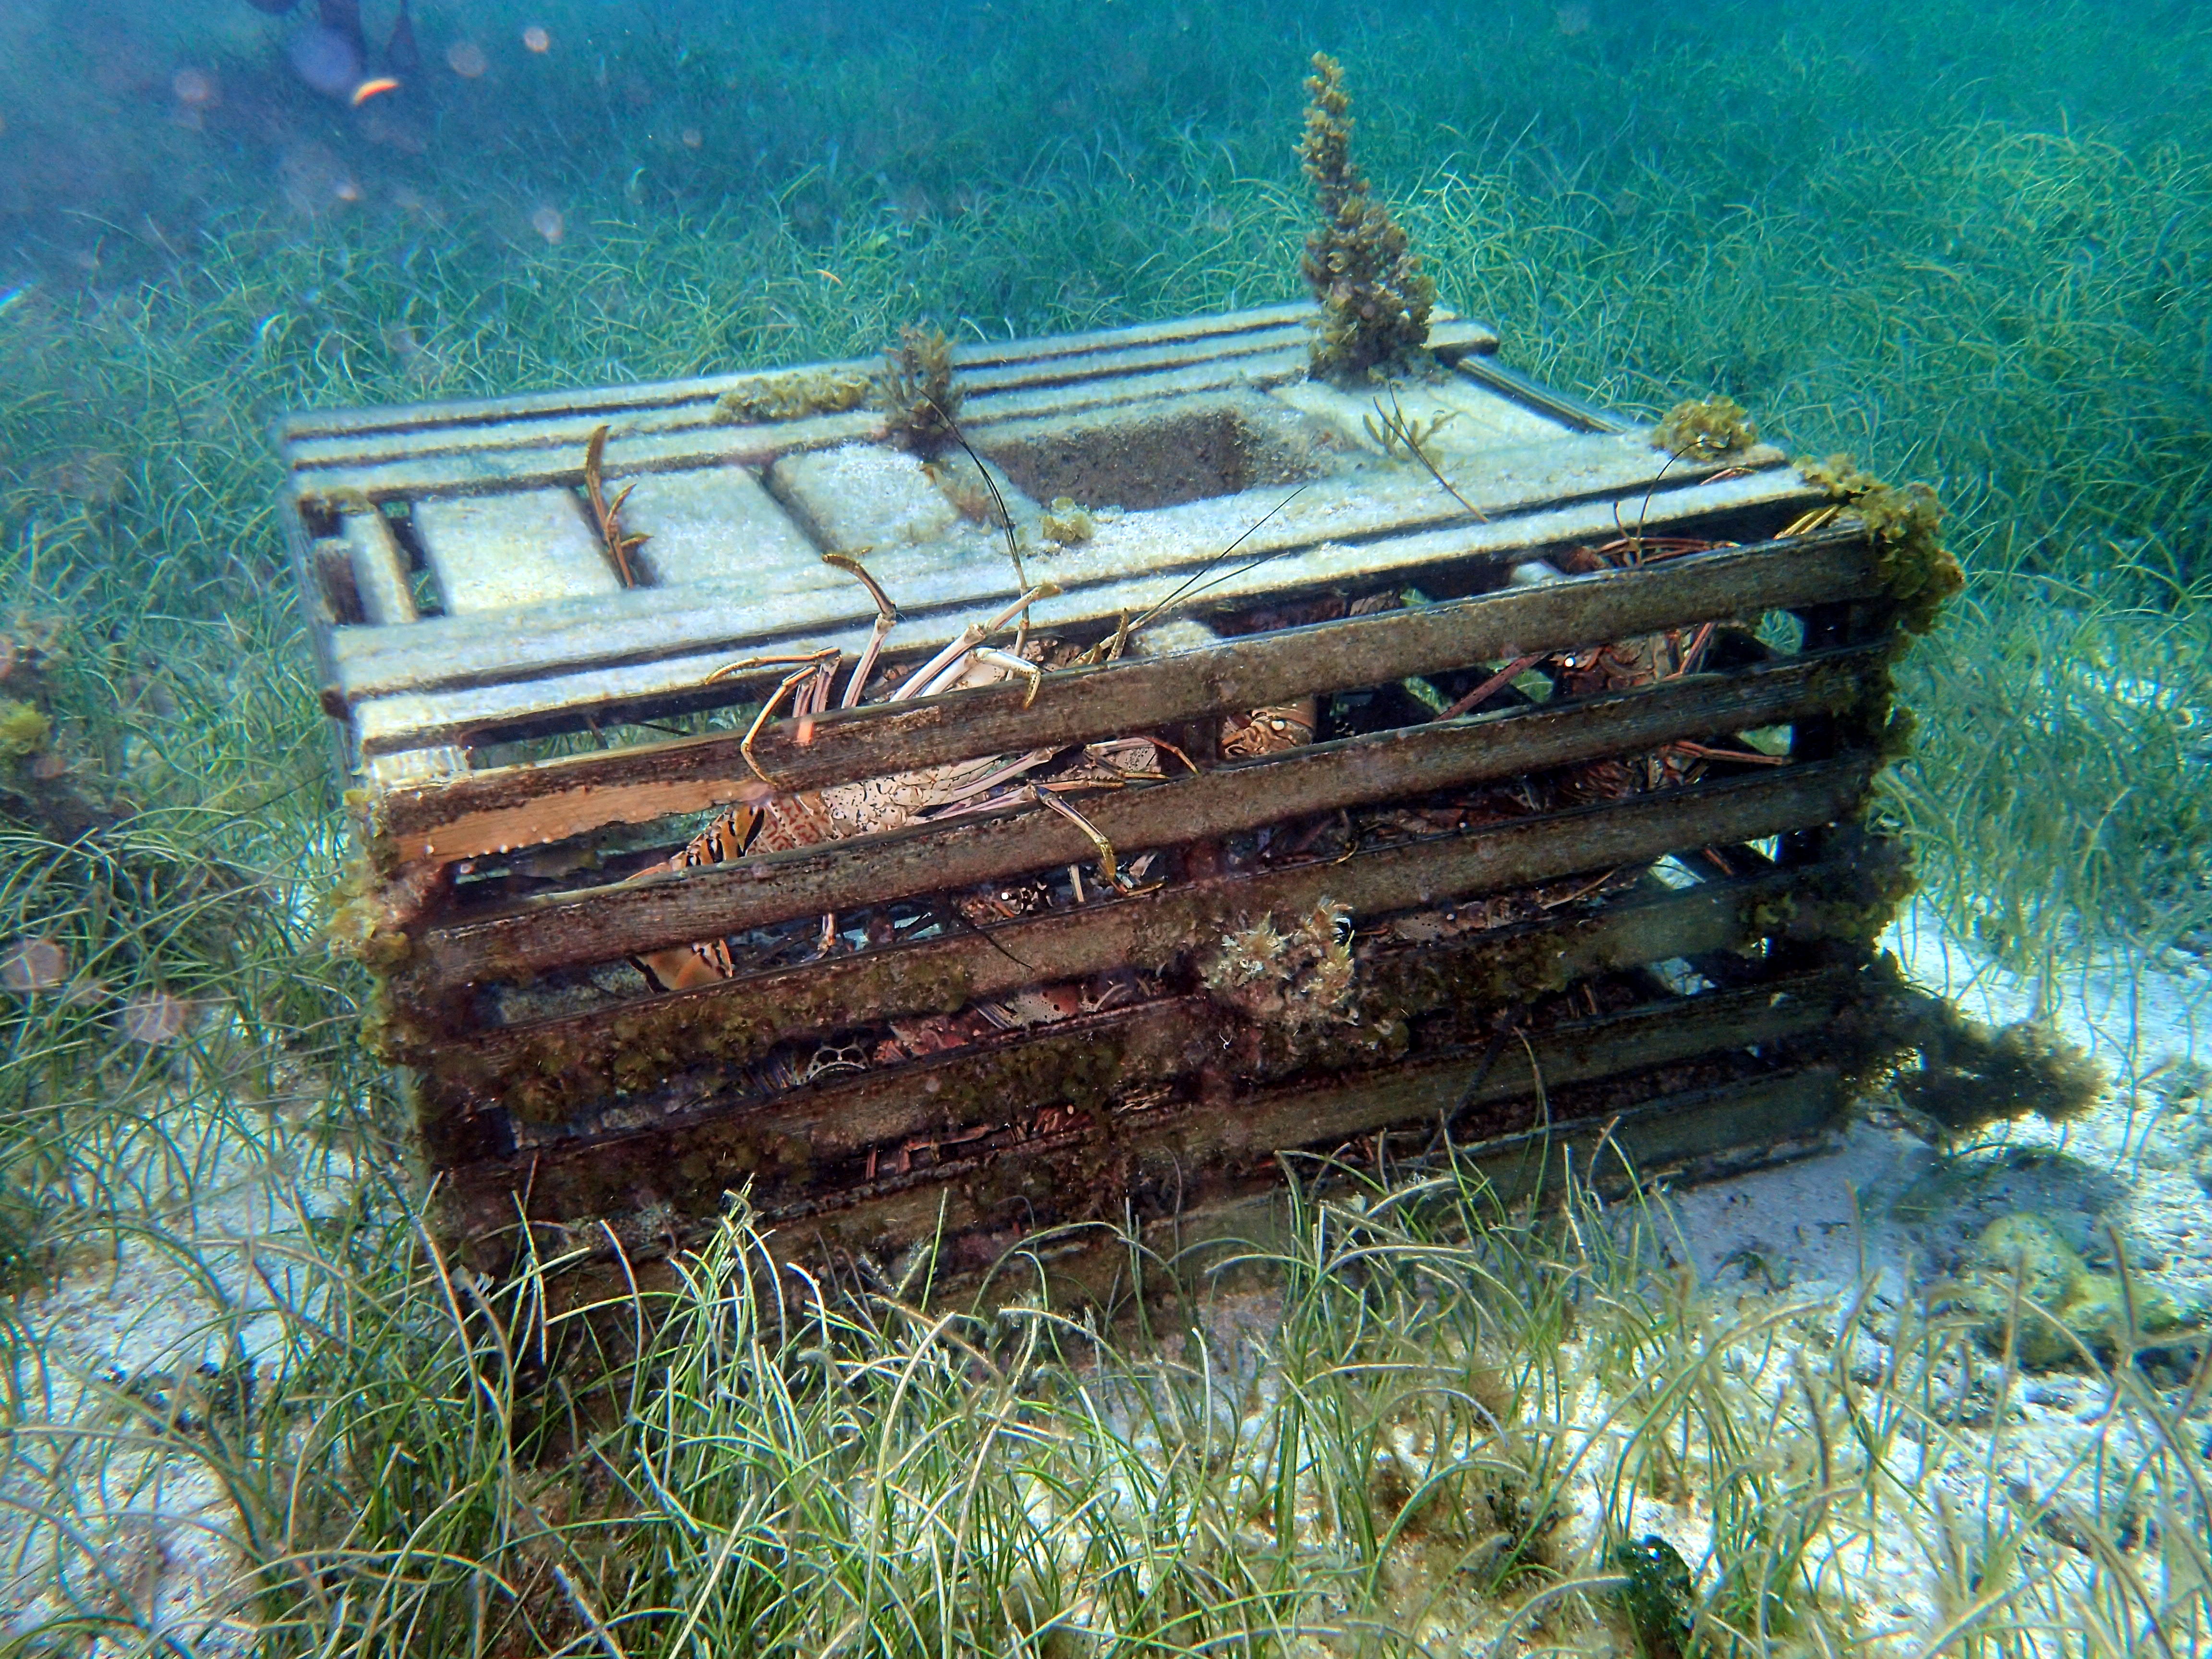 A derelict lobster trap at the bottom of the seafloor.